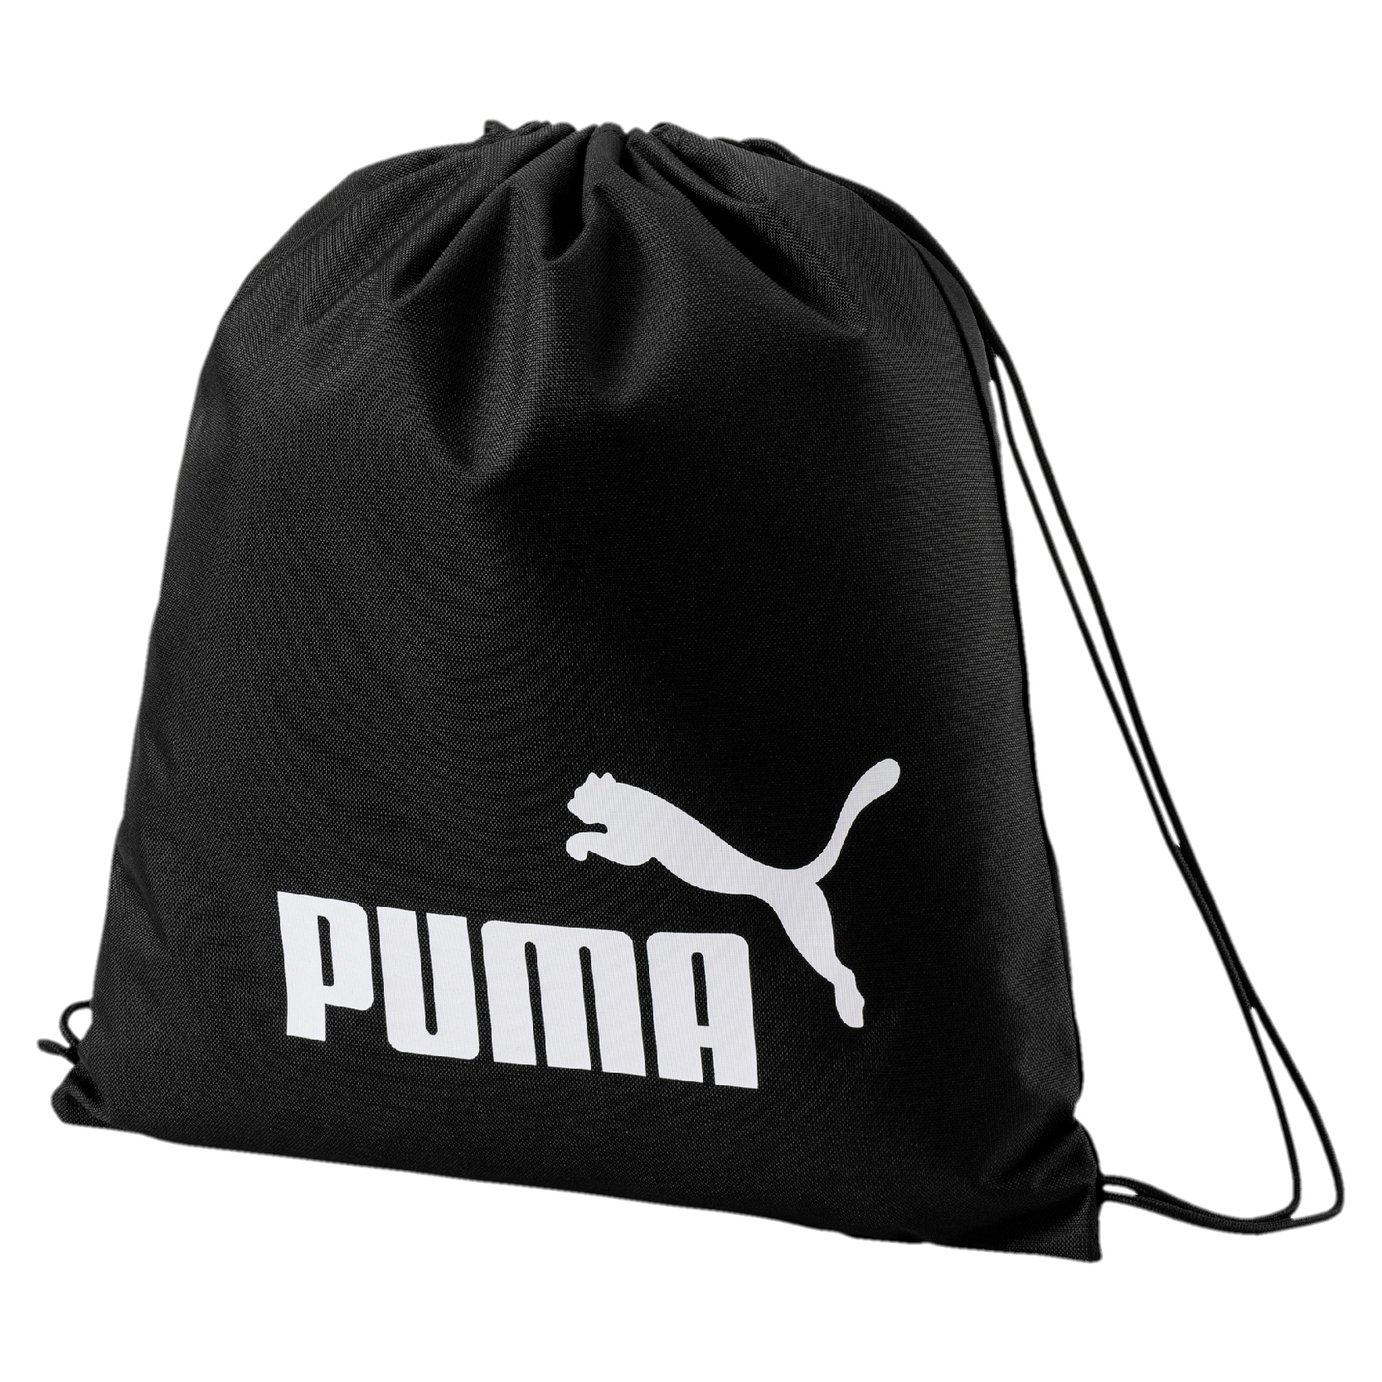 Puma Phase Gymsack Review